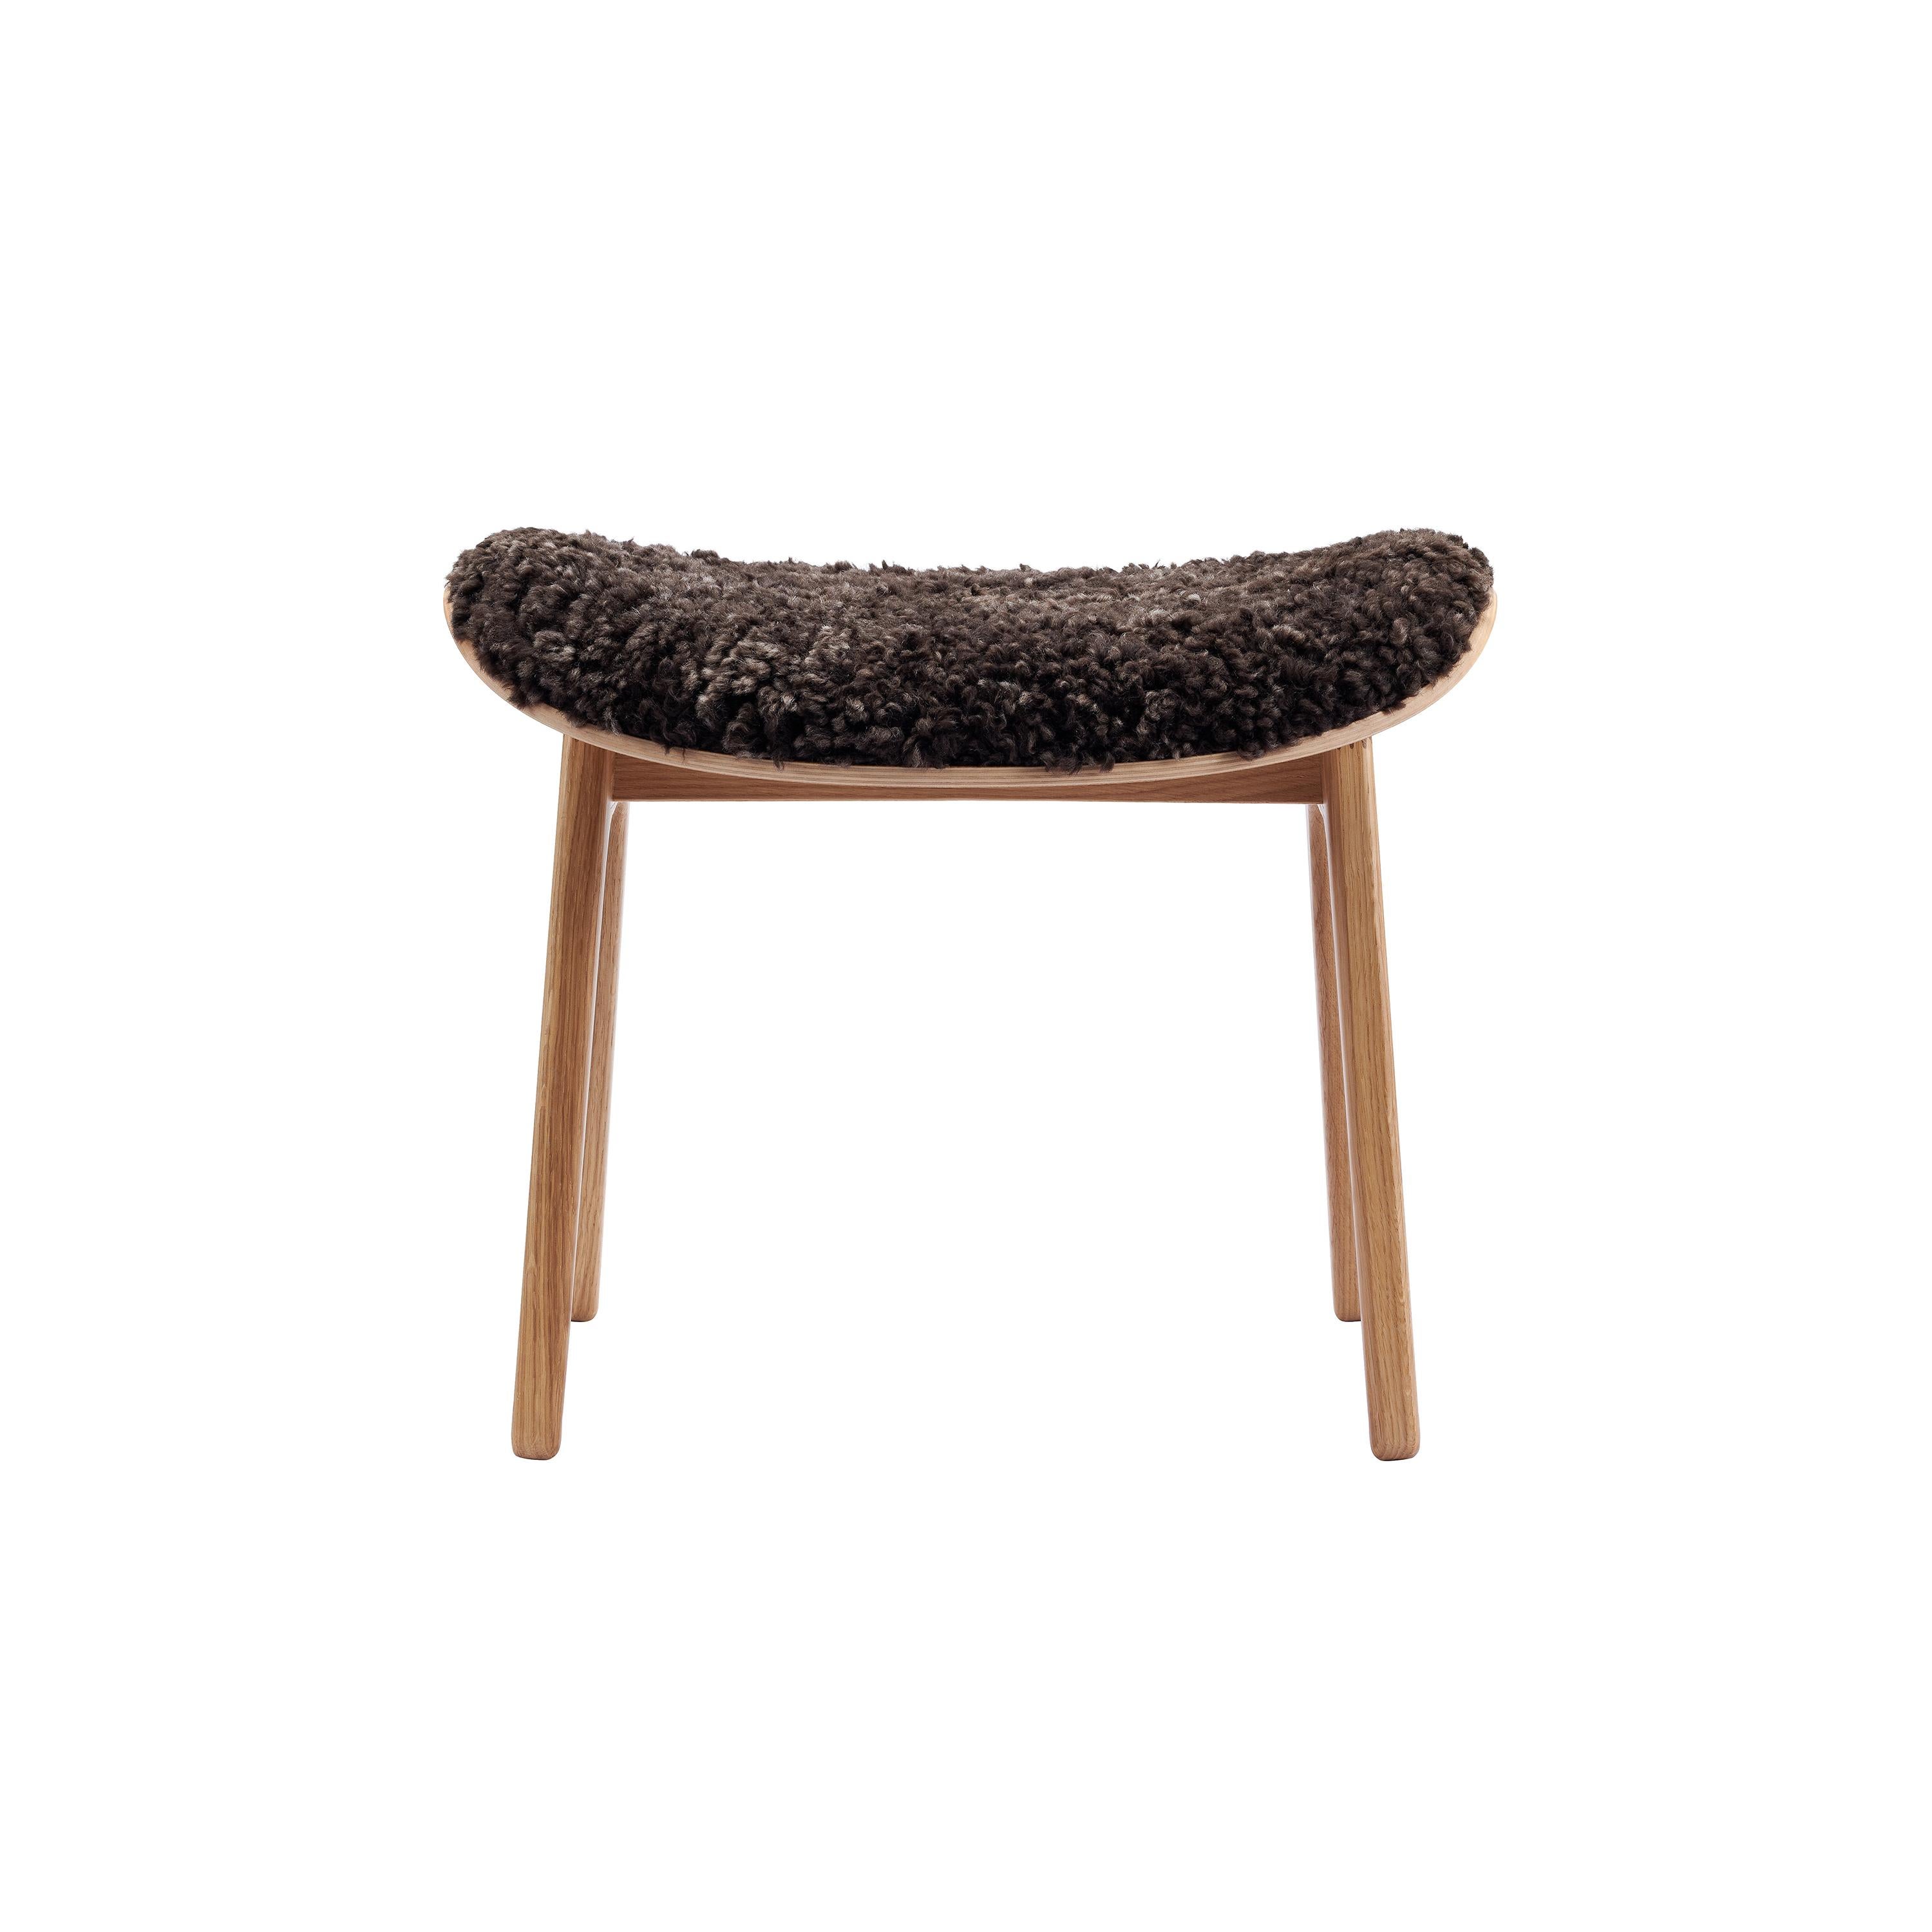 'Elephant' Lounge Chair + Stool, Natural Oak, Sheepskin Set by Norr11 In New Condition For Sale In Paris, FR